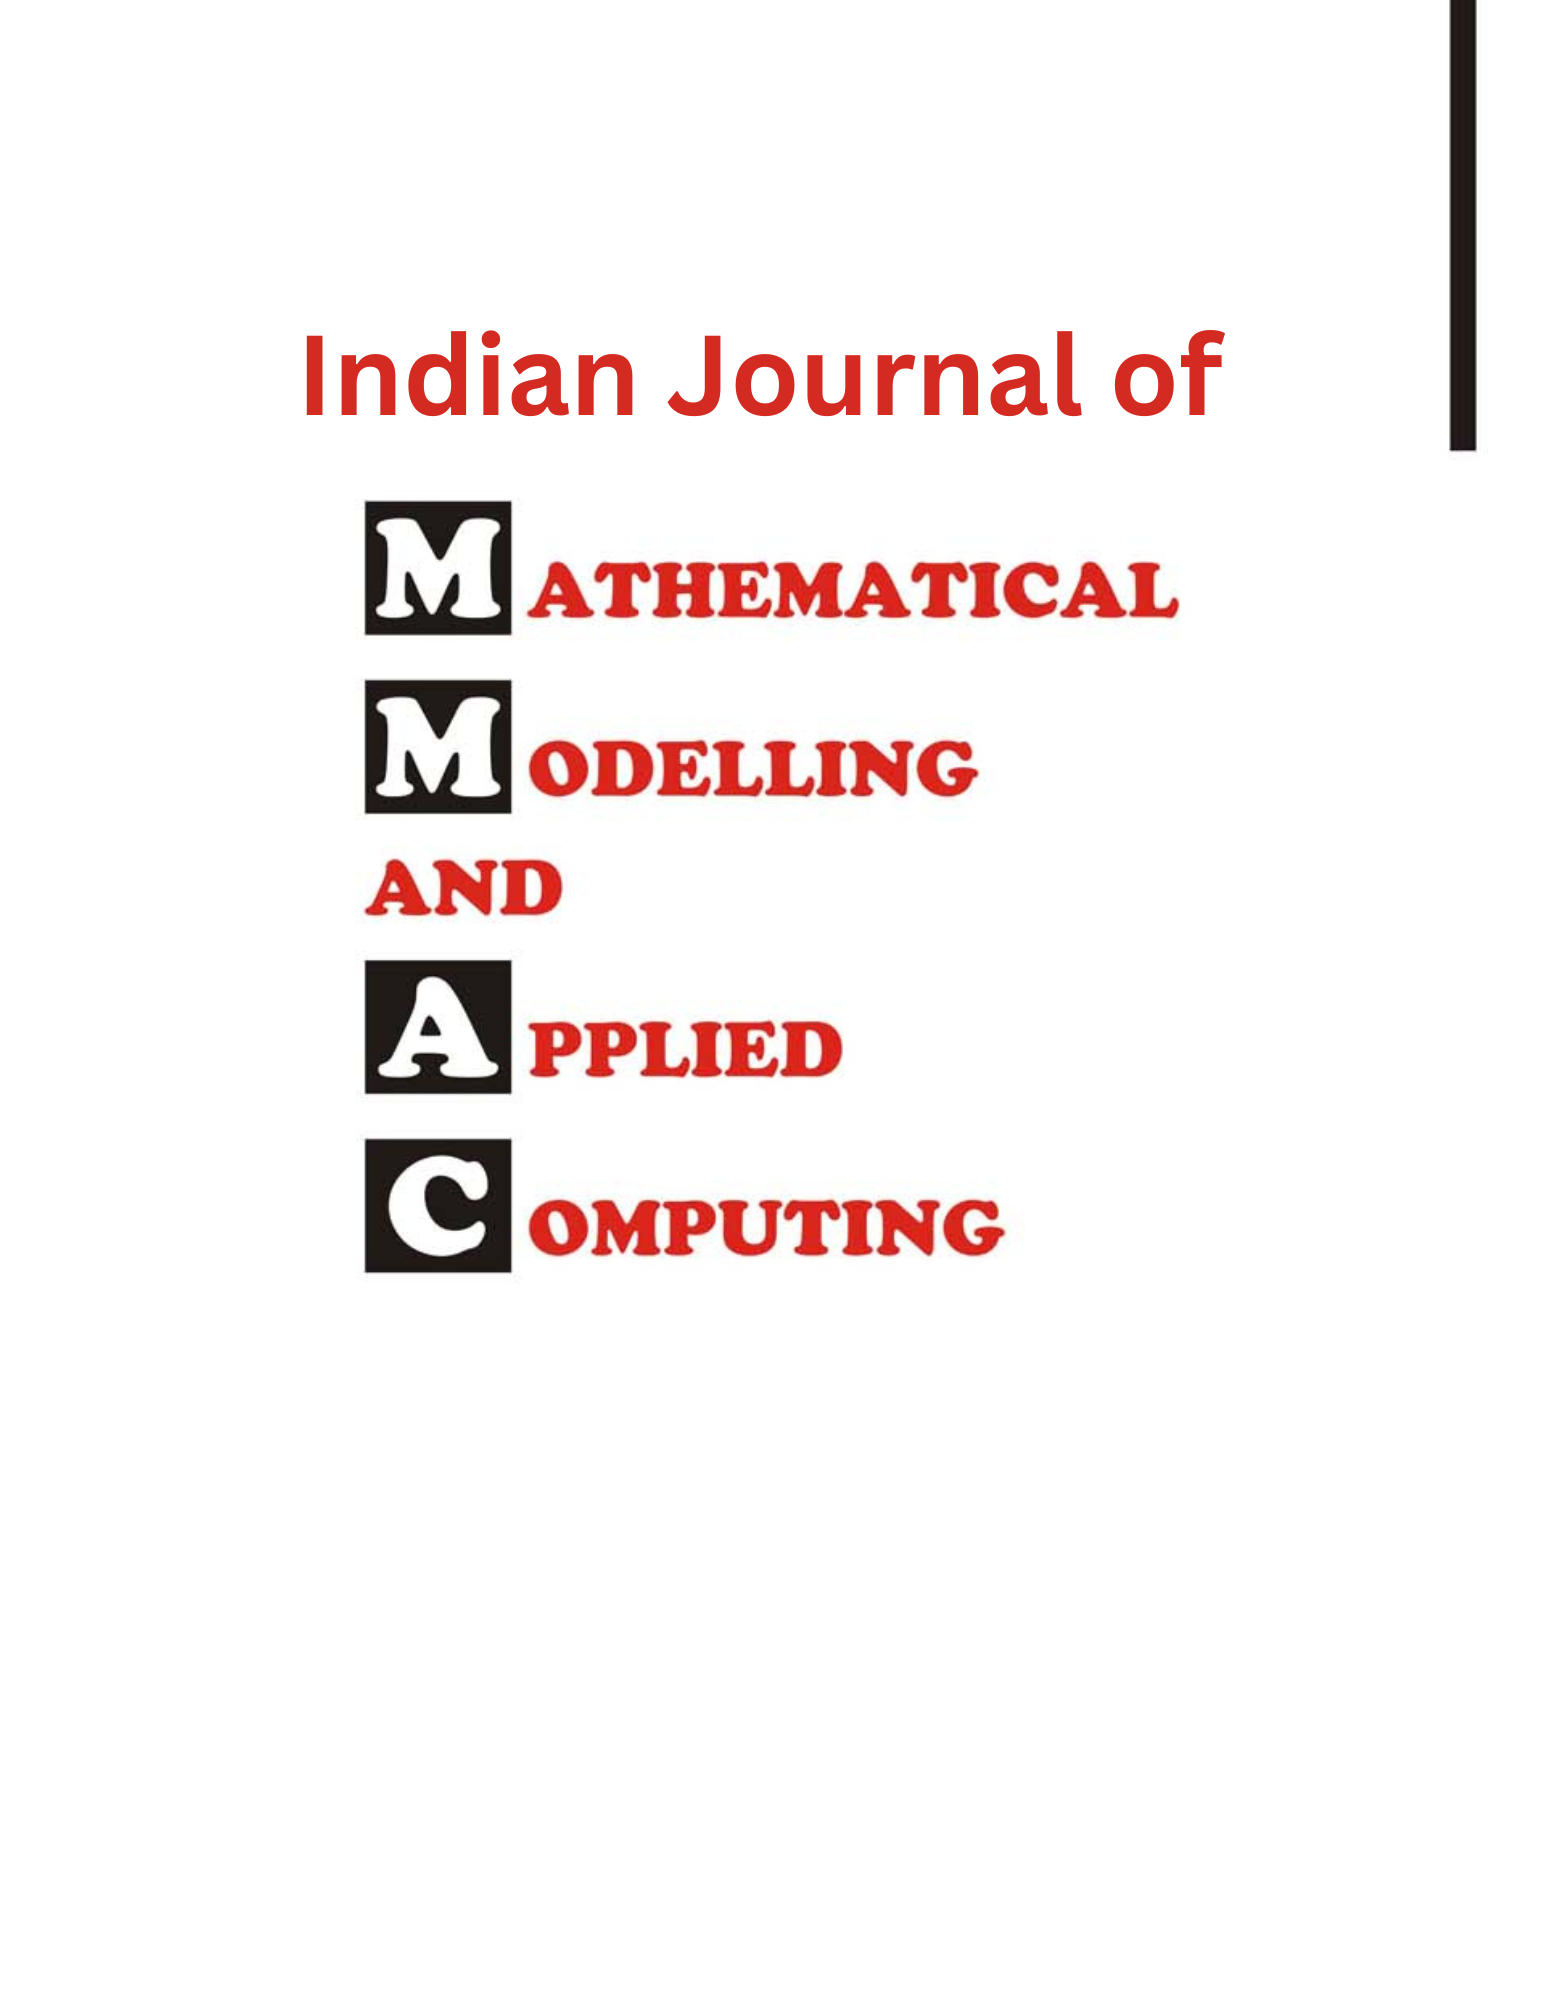 Indian Journal of Mathematical Modelling and Applied Computing